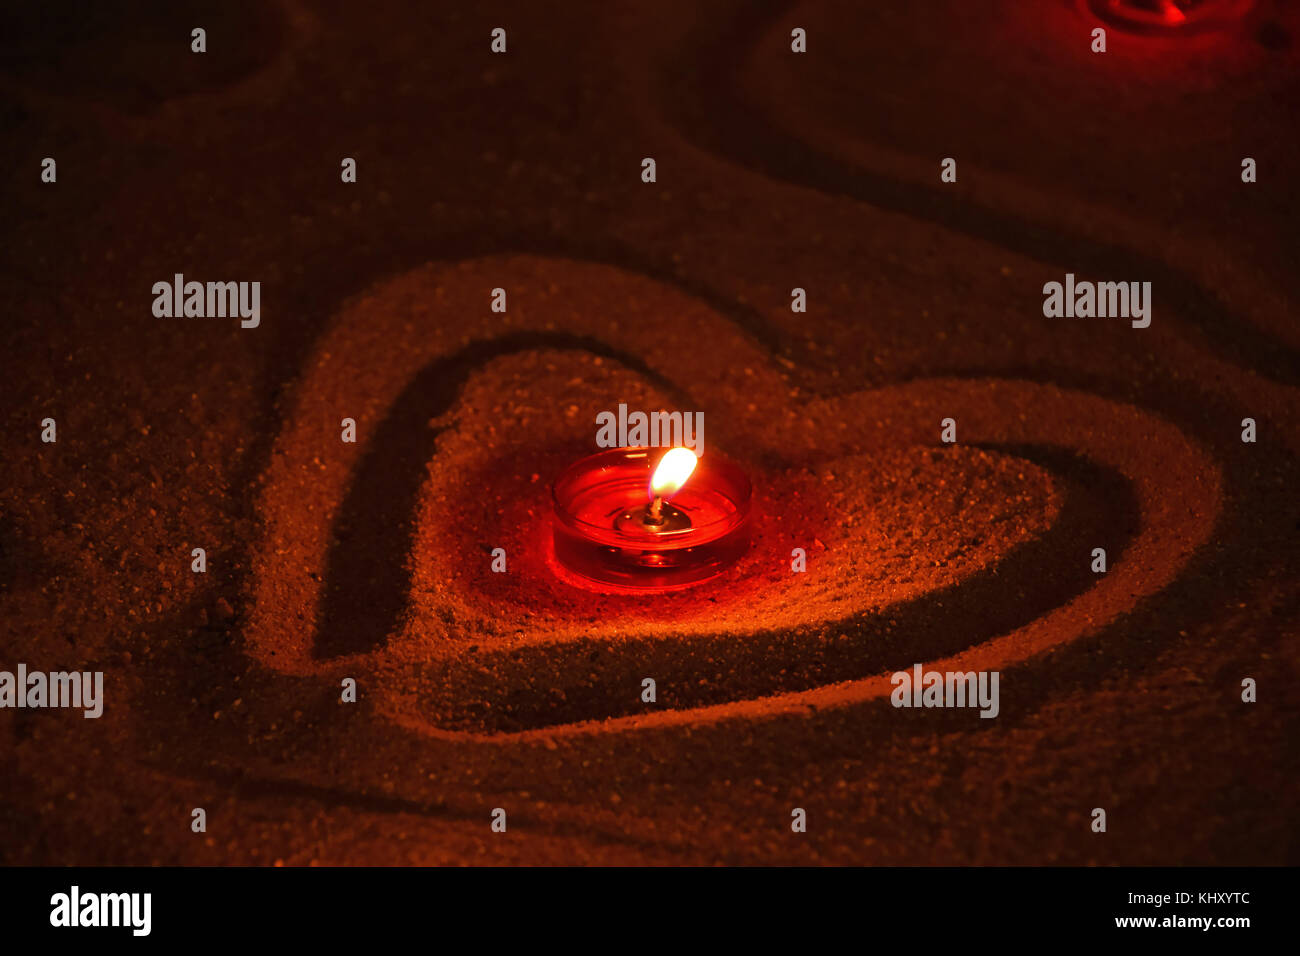 Red church tea candle burning in heart shaped sand, close up, high angle view Stock Photo